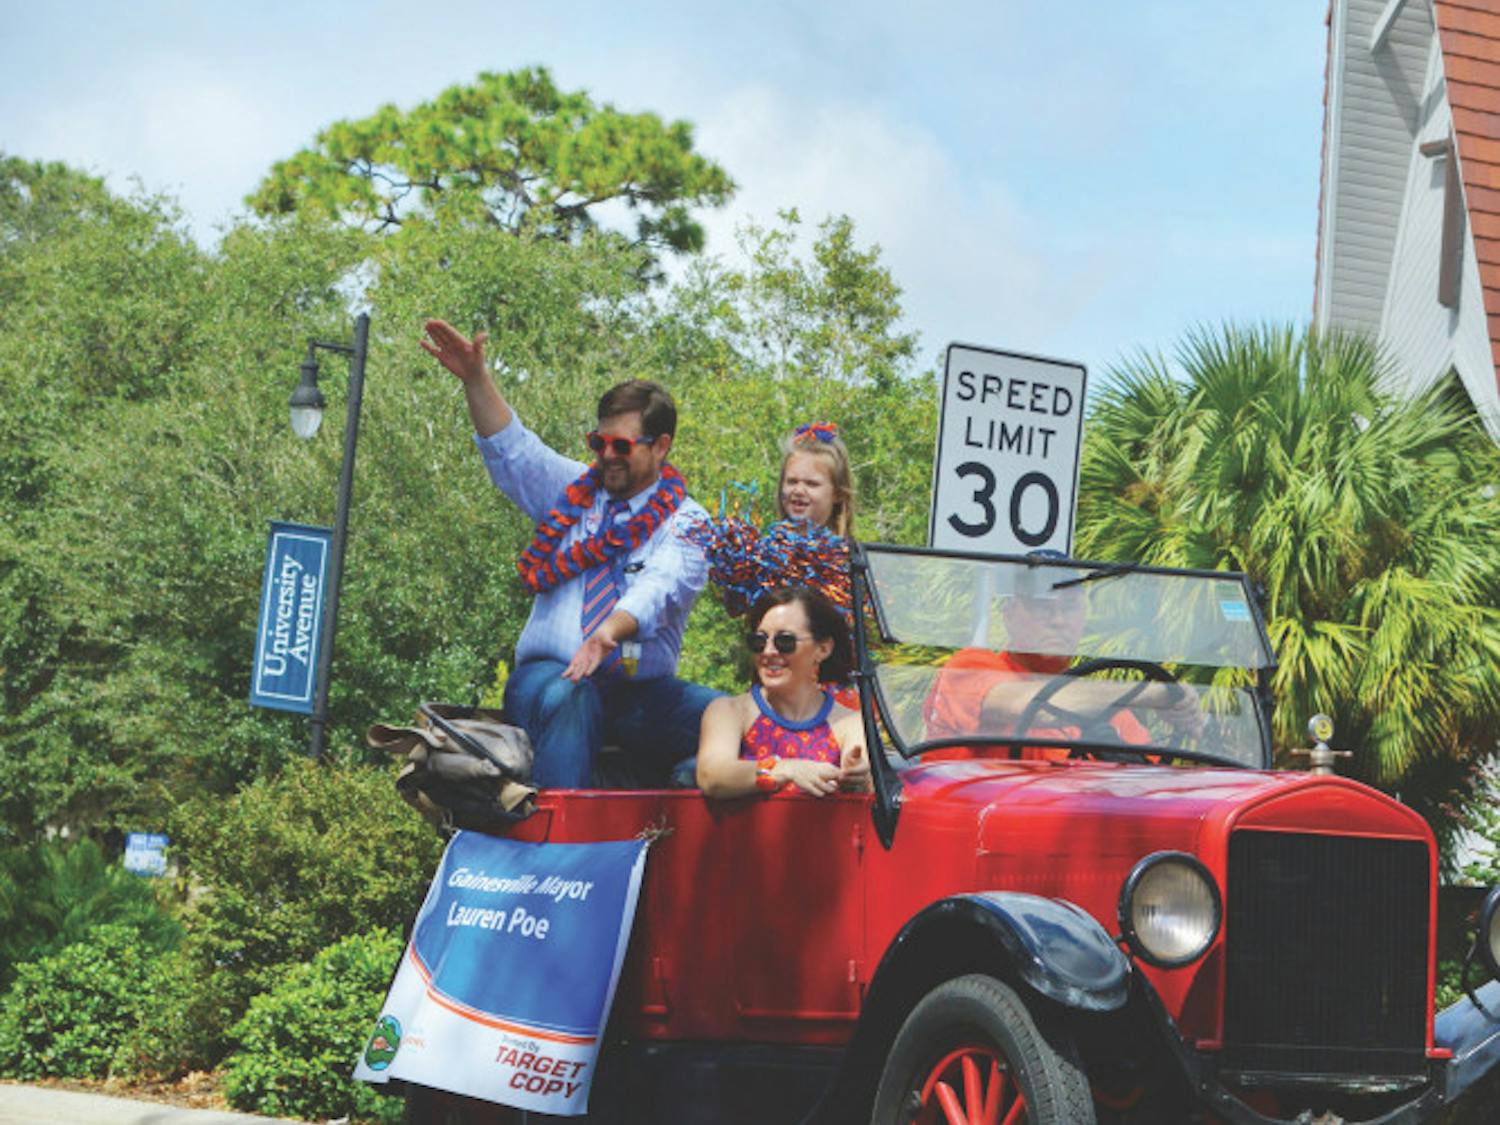 The 2017 Homecoming weekend kicked off with the Gator Gallop, a short 2-mile run around UF’s campus, on Friday morning. Afterward, fans lined up along West University Avenue to watch the annual UF Homecoming Parade at noon, which included more than 100 different floats. On Friday evening, fans gathered on Flavet Field for performances by rapper Snoop Dogg and singer Daya for Gator Growl. On Saturday, the Florida Gators played the Louisiana State University Tigers for the annual Homecoming football game.